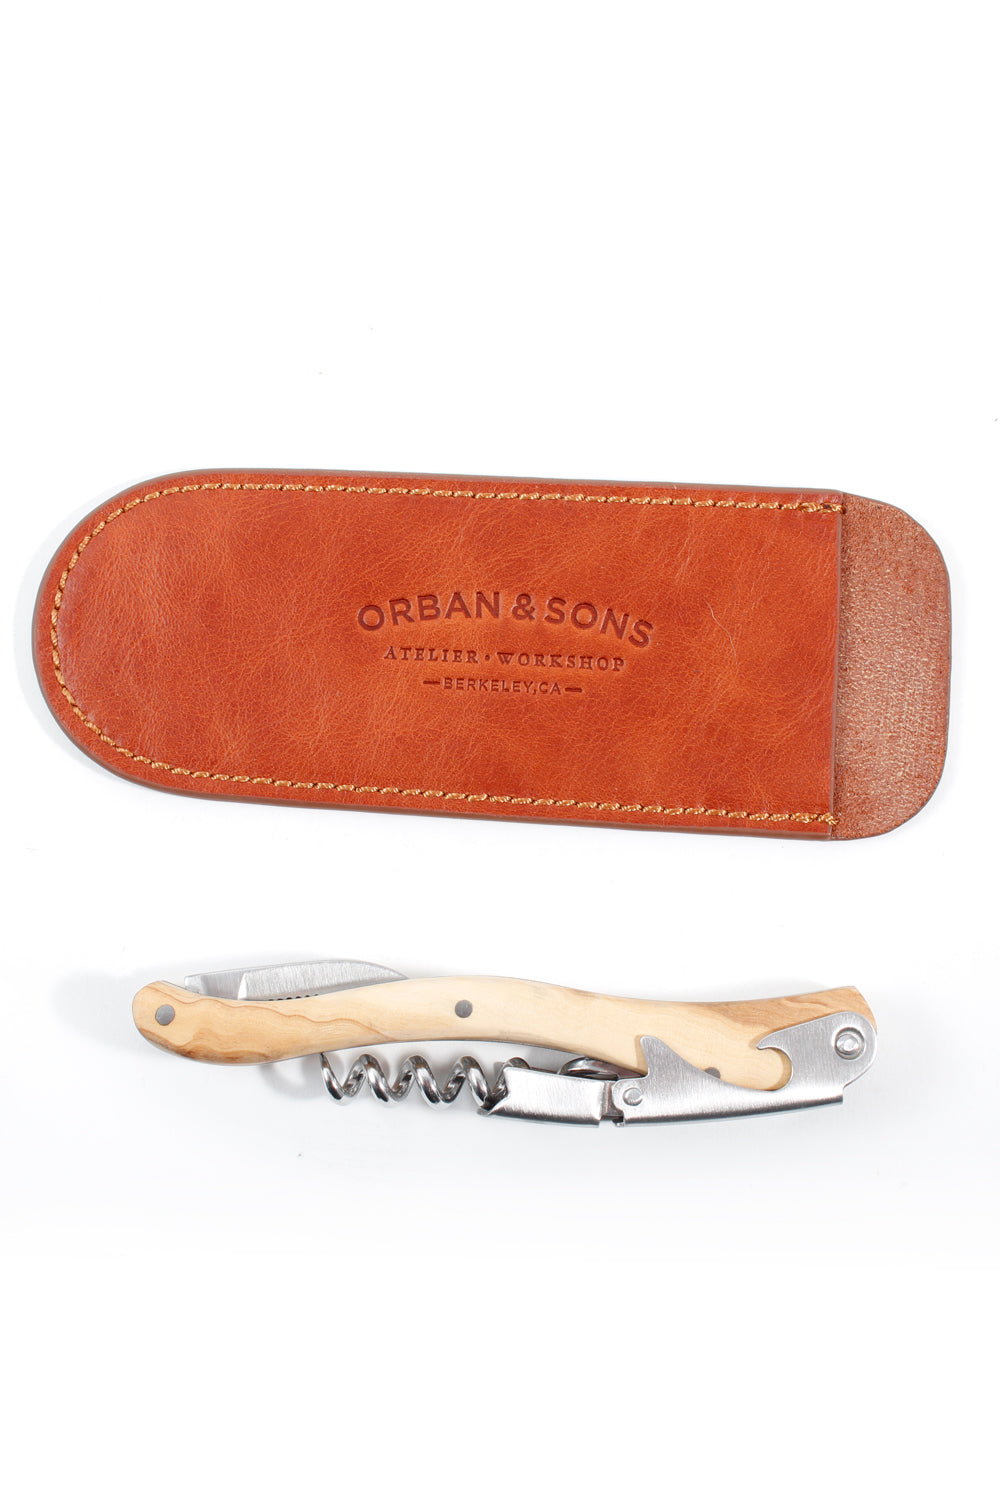 Orban & Sons Small Olivewood Corkscrew With Leather Pouch Orban & Sons Brand_Orban & Sons Knobs & Pulls Orban & Sons MG_8451